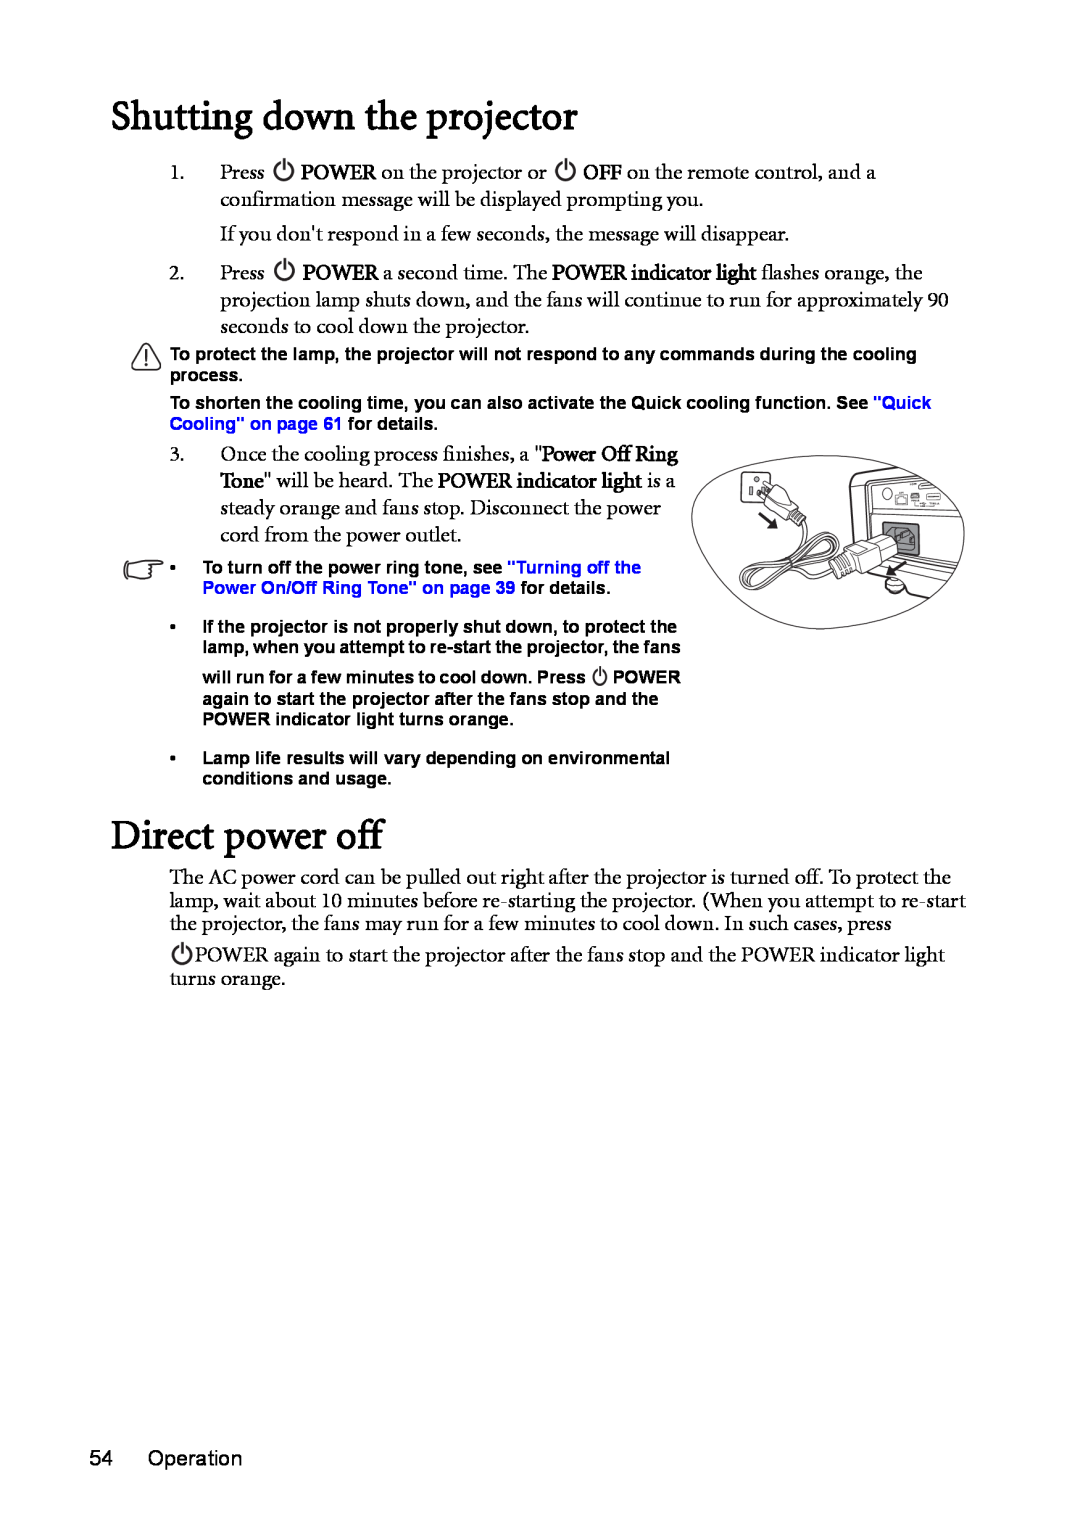 BenQ MW811ST, MX812ST user manual Shutting down the projector, Direct power off 